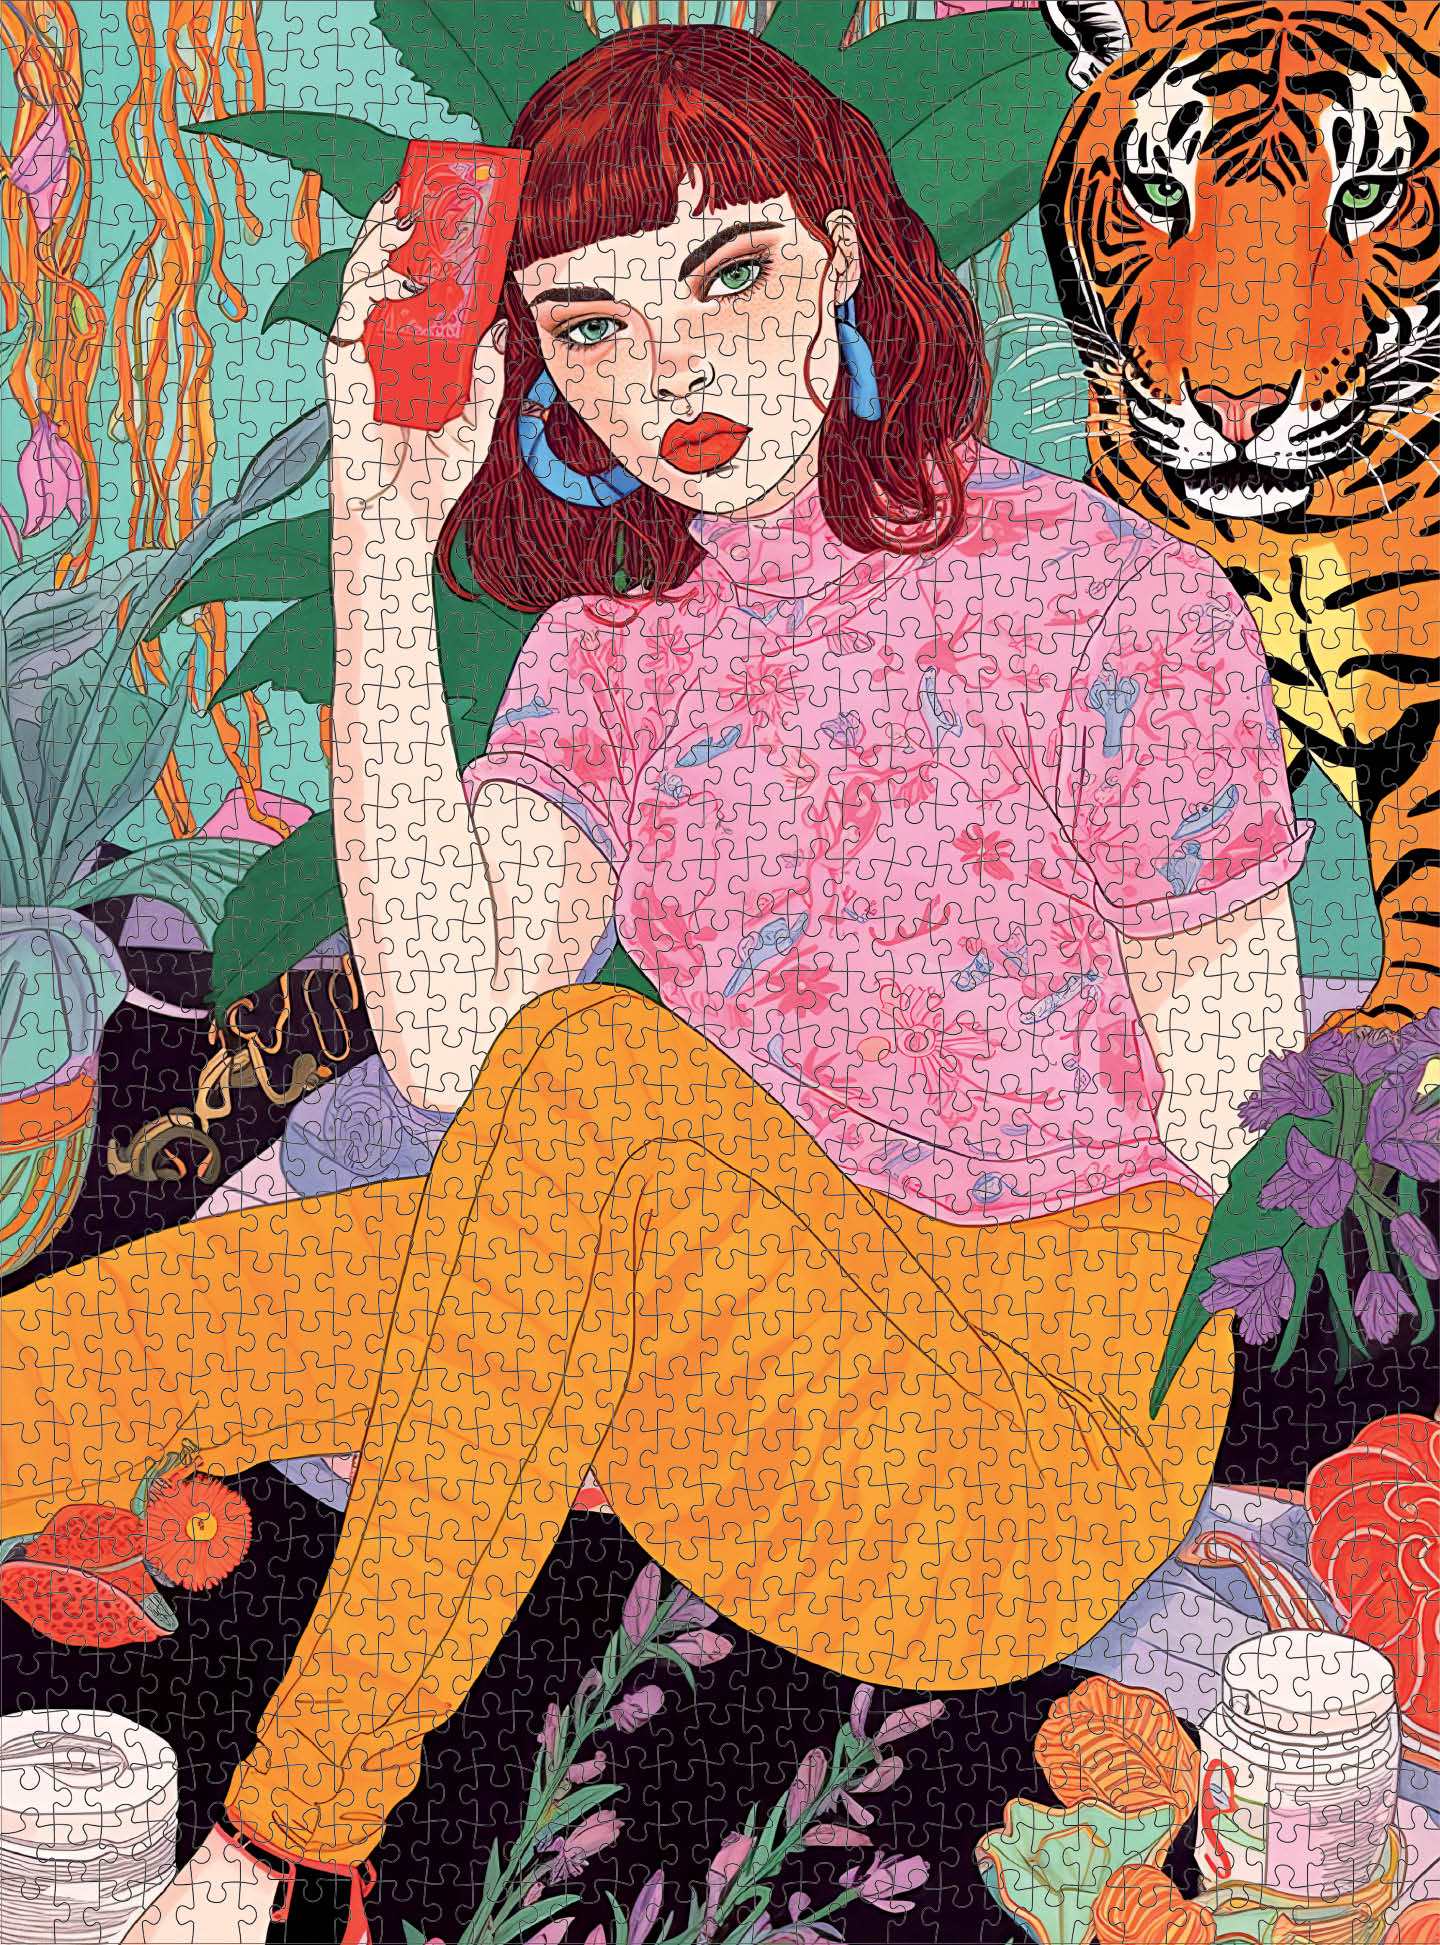 An Enchanted Redhead & Tiger's Tryst - 1000 Piece Jigsaw Puzzle